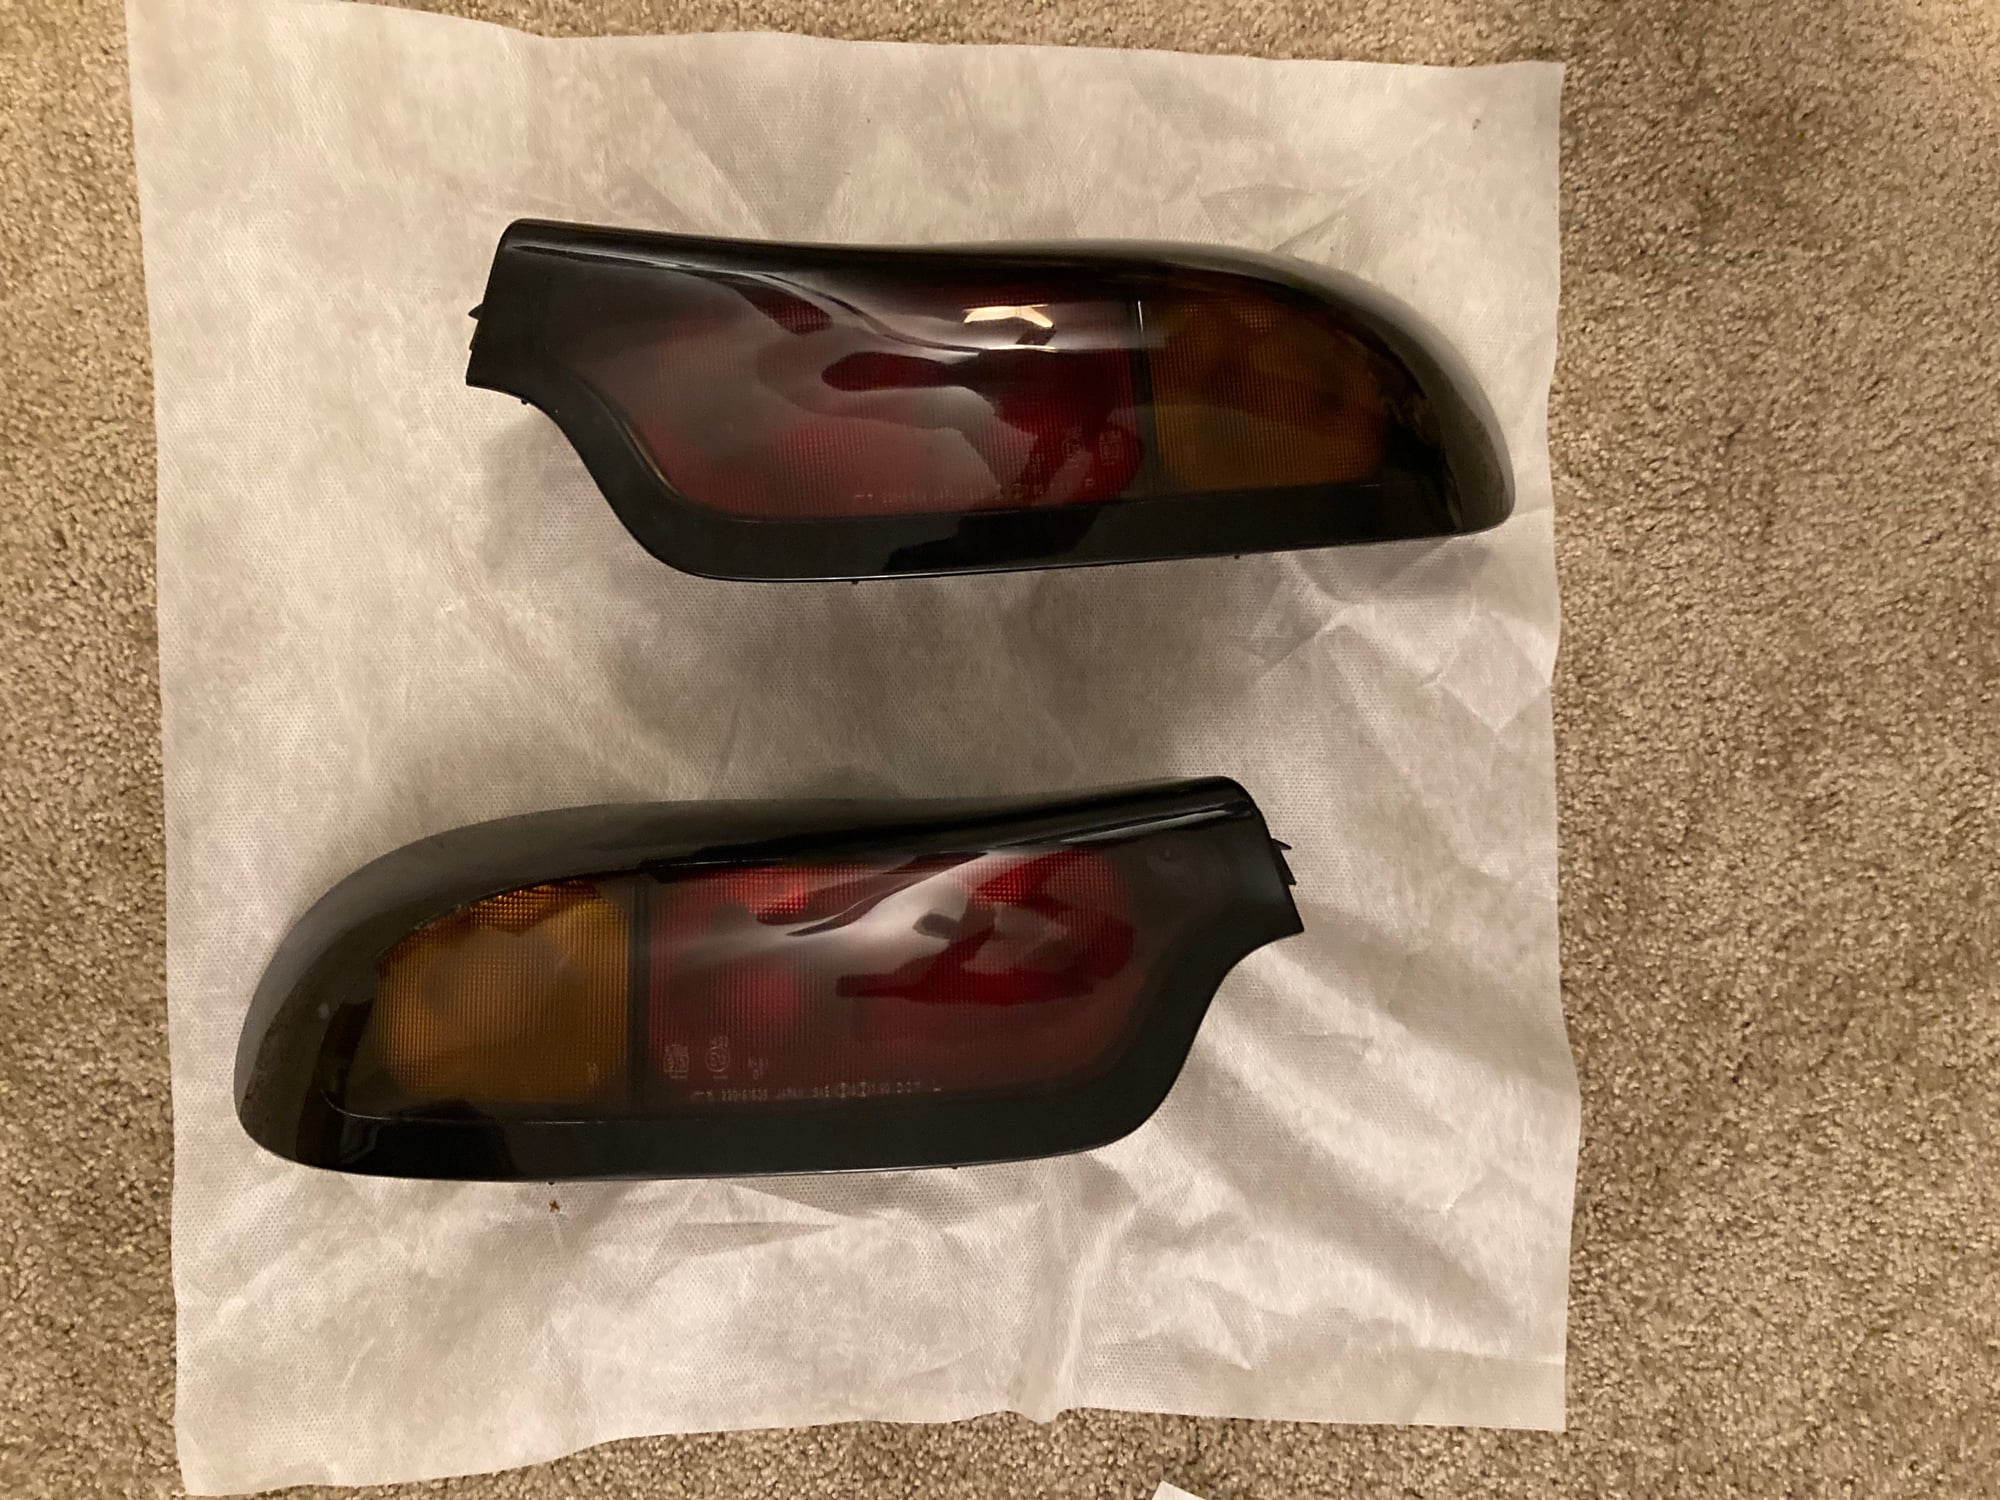 Lights - OEM USDM Taillight Housings - Used - 1993 to 2002 Mazda RX-7 - Indianapolis, IN 46278, United States